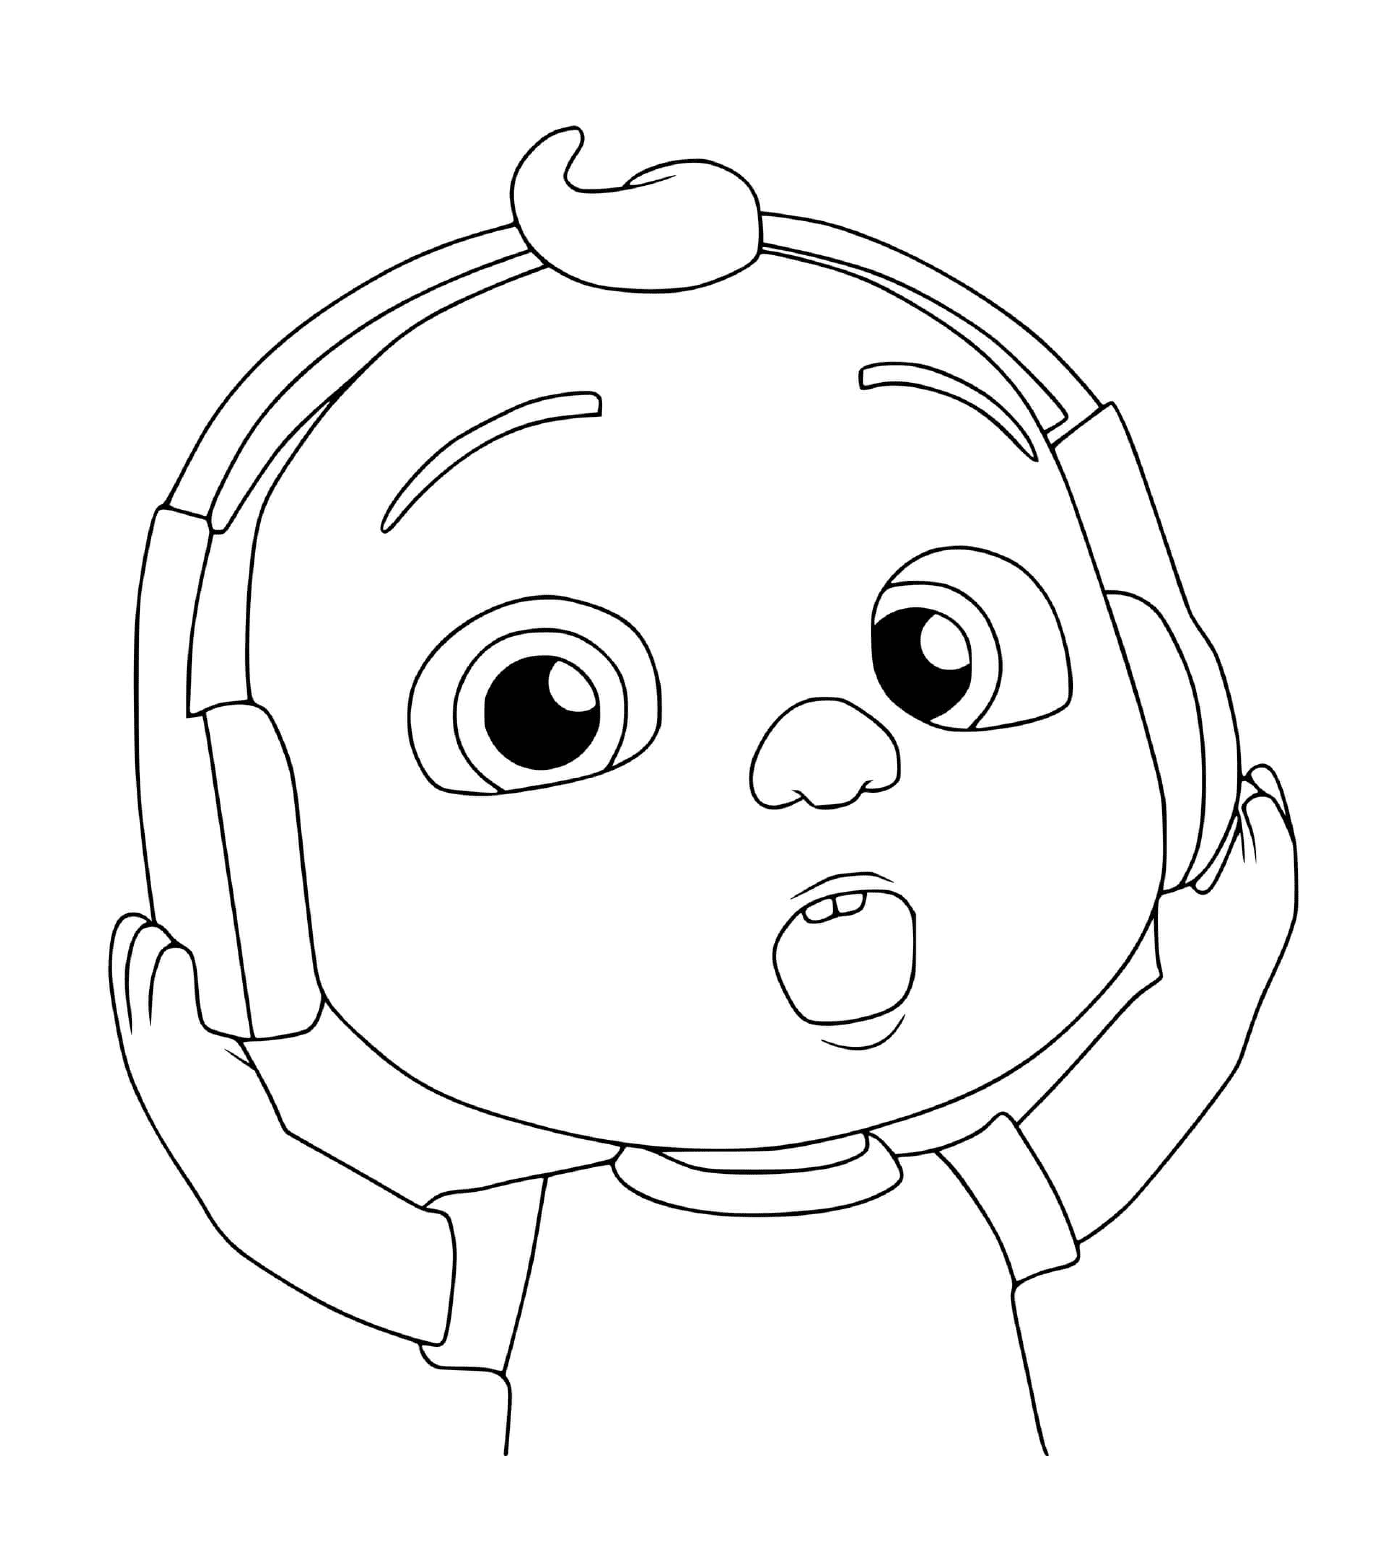  Child of CoComelon listens to music 